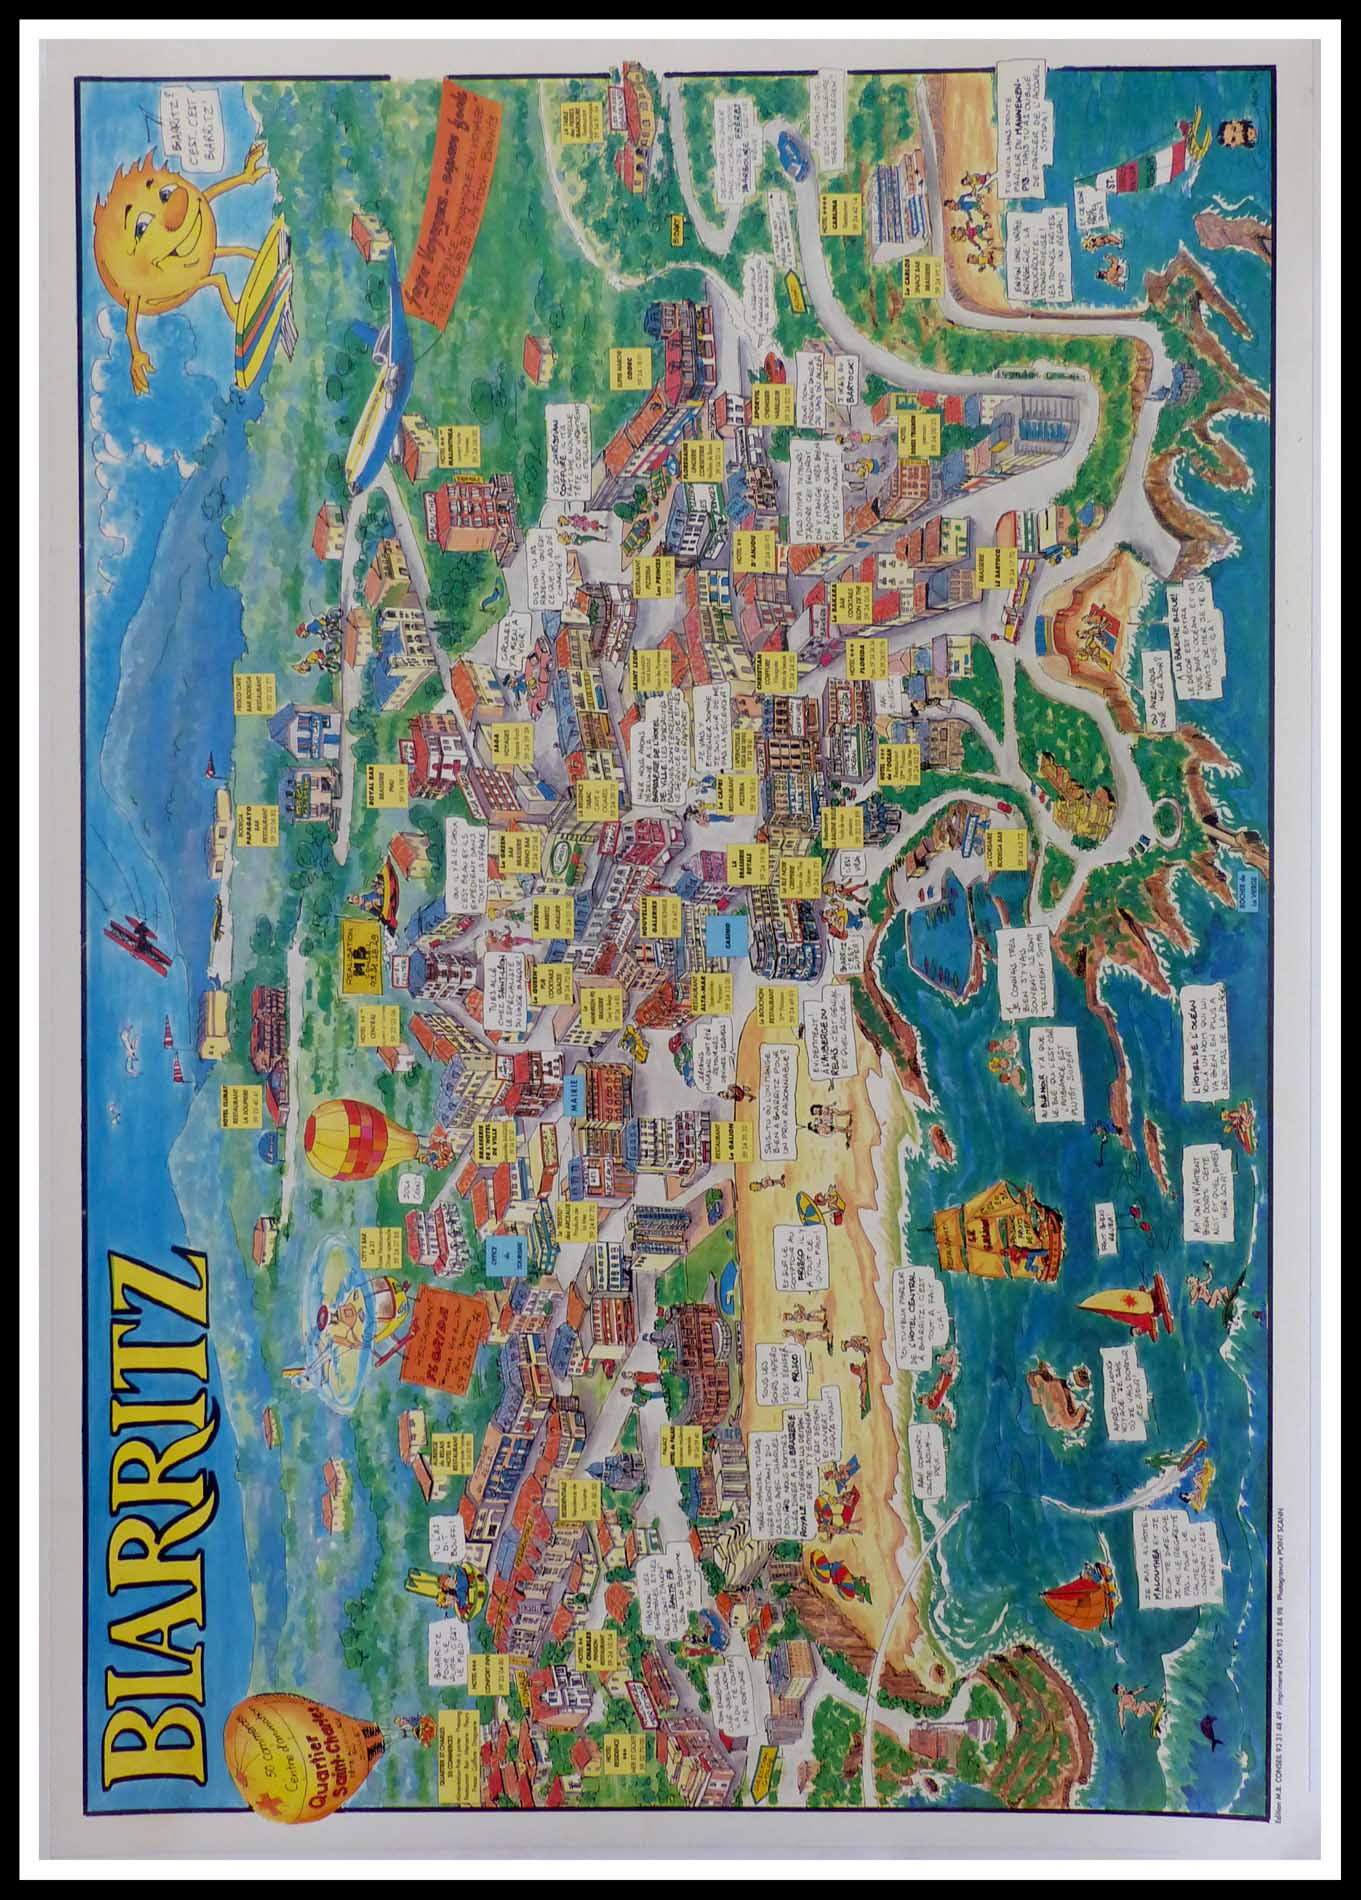 (alt="original vintage french travel poster, BIARRITZ, signed in the HUDIC, printed by PONS 1992")